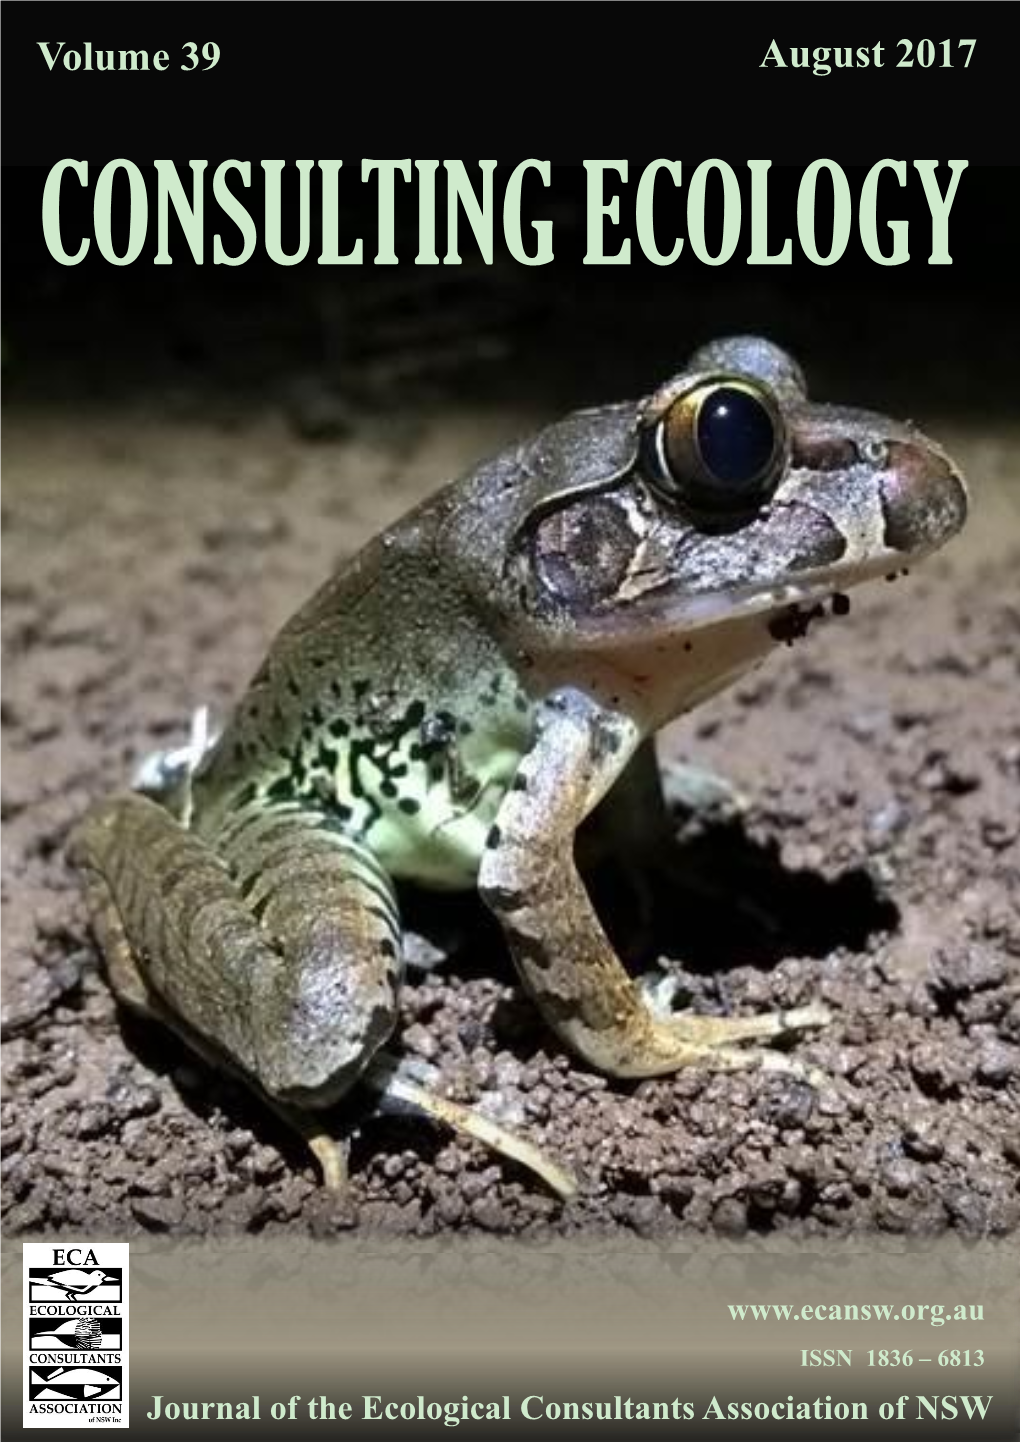 Volume 39 August 2017 CONSULTING ECOLOGY